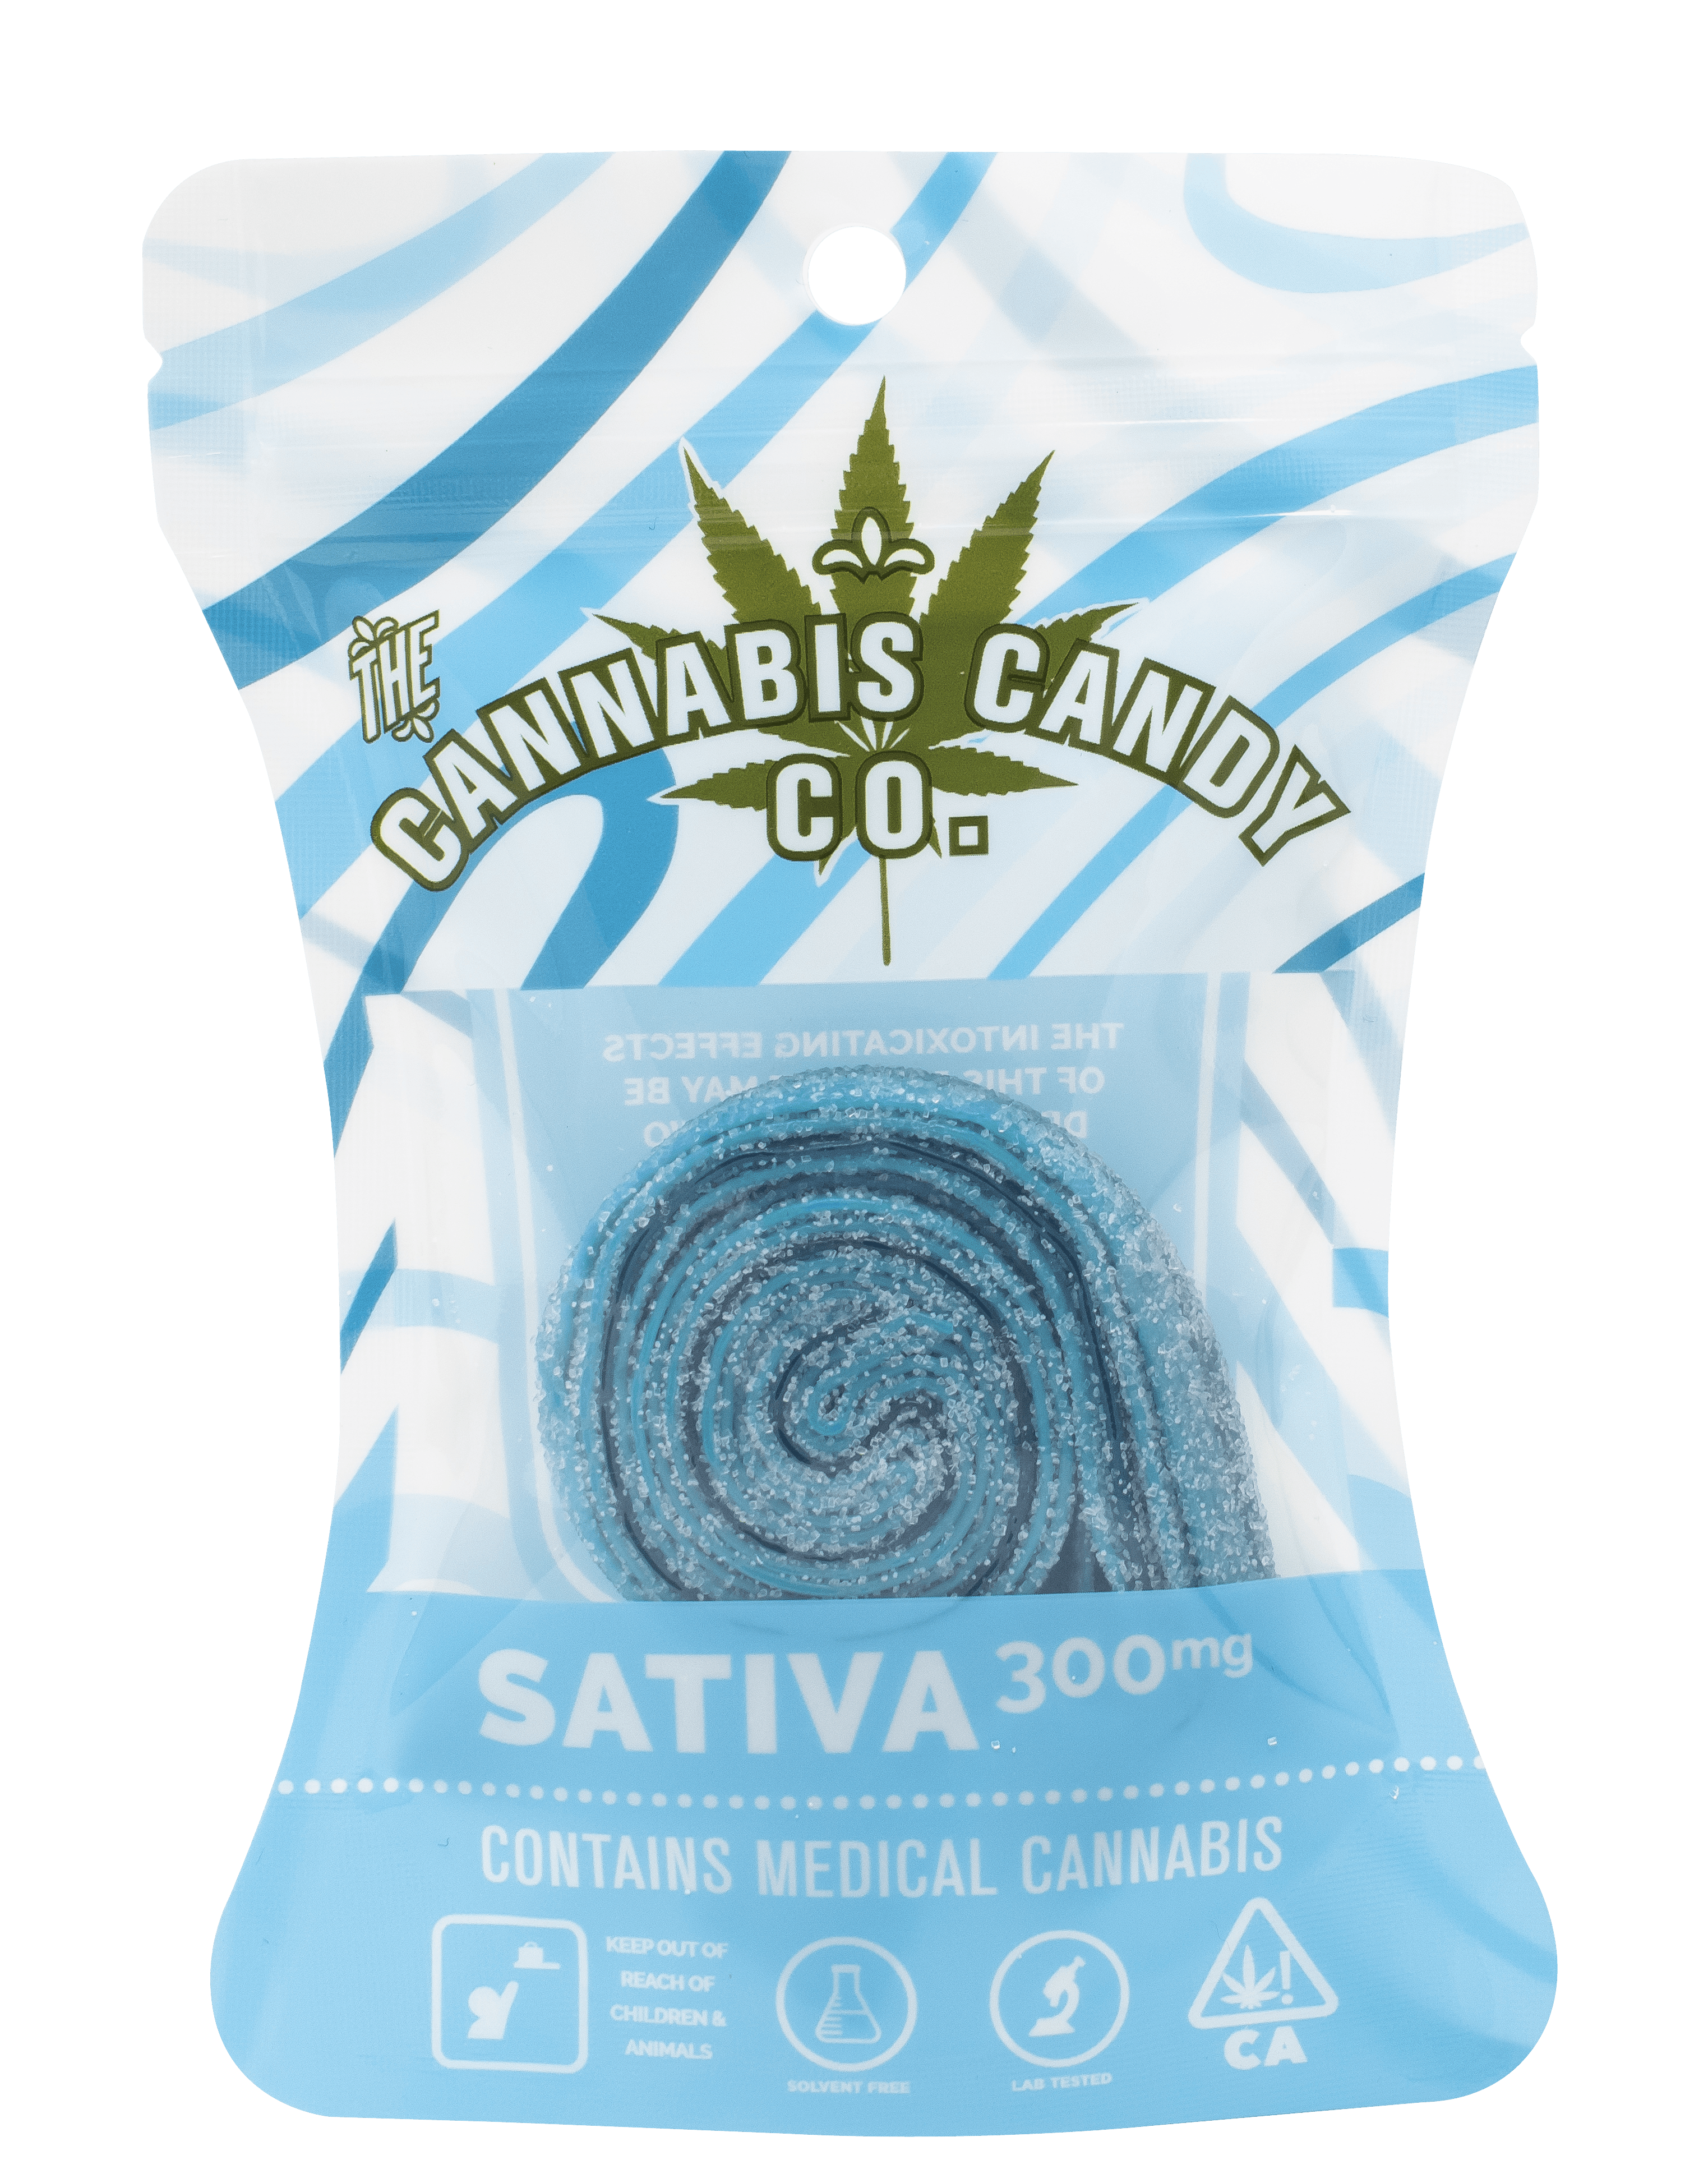 edible-cannabis-candy-co-300mg-sativa-blueberry-belts